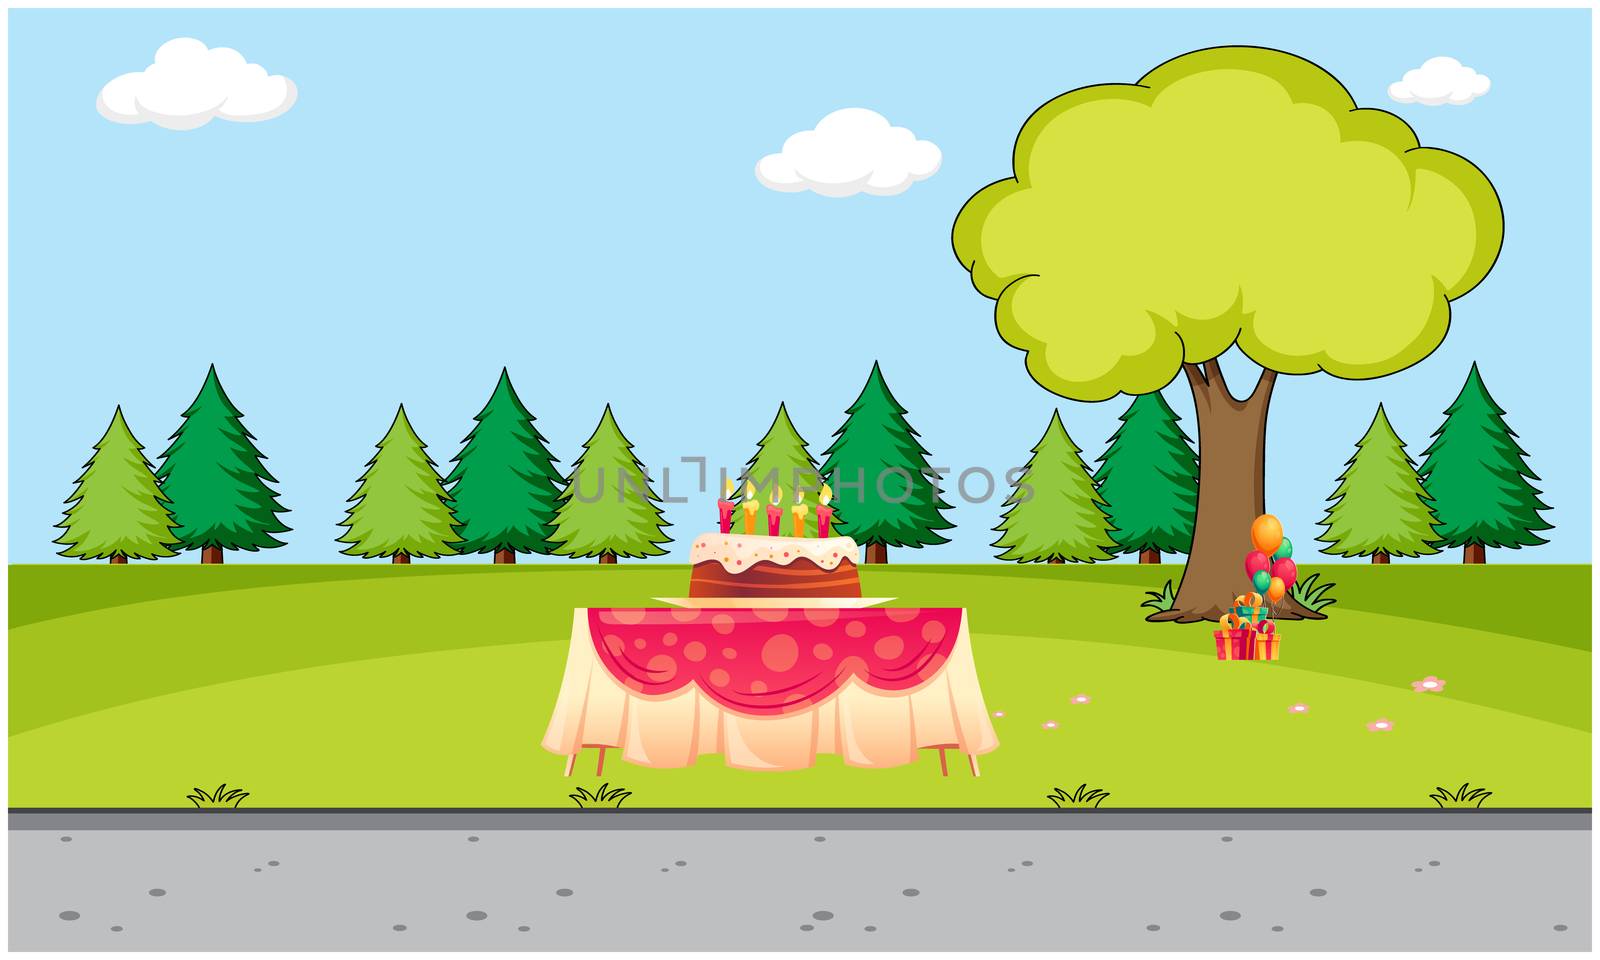 birthday cake is placed on the tables in the garden by aanavcreationsplus